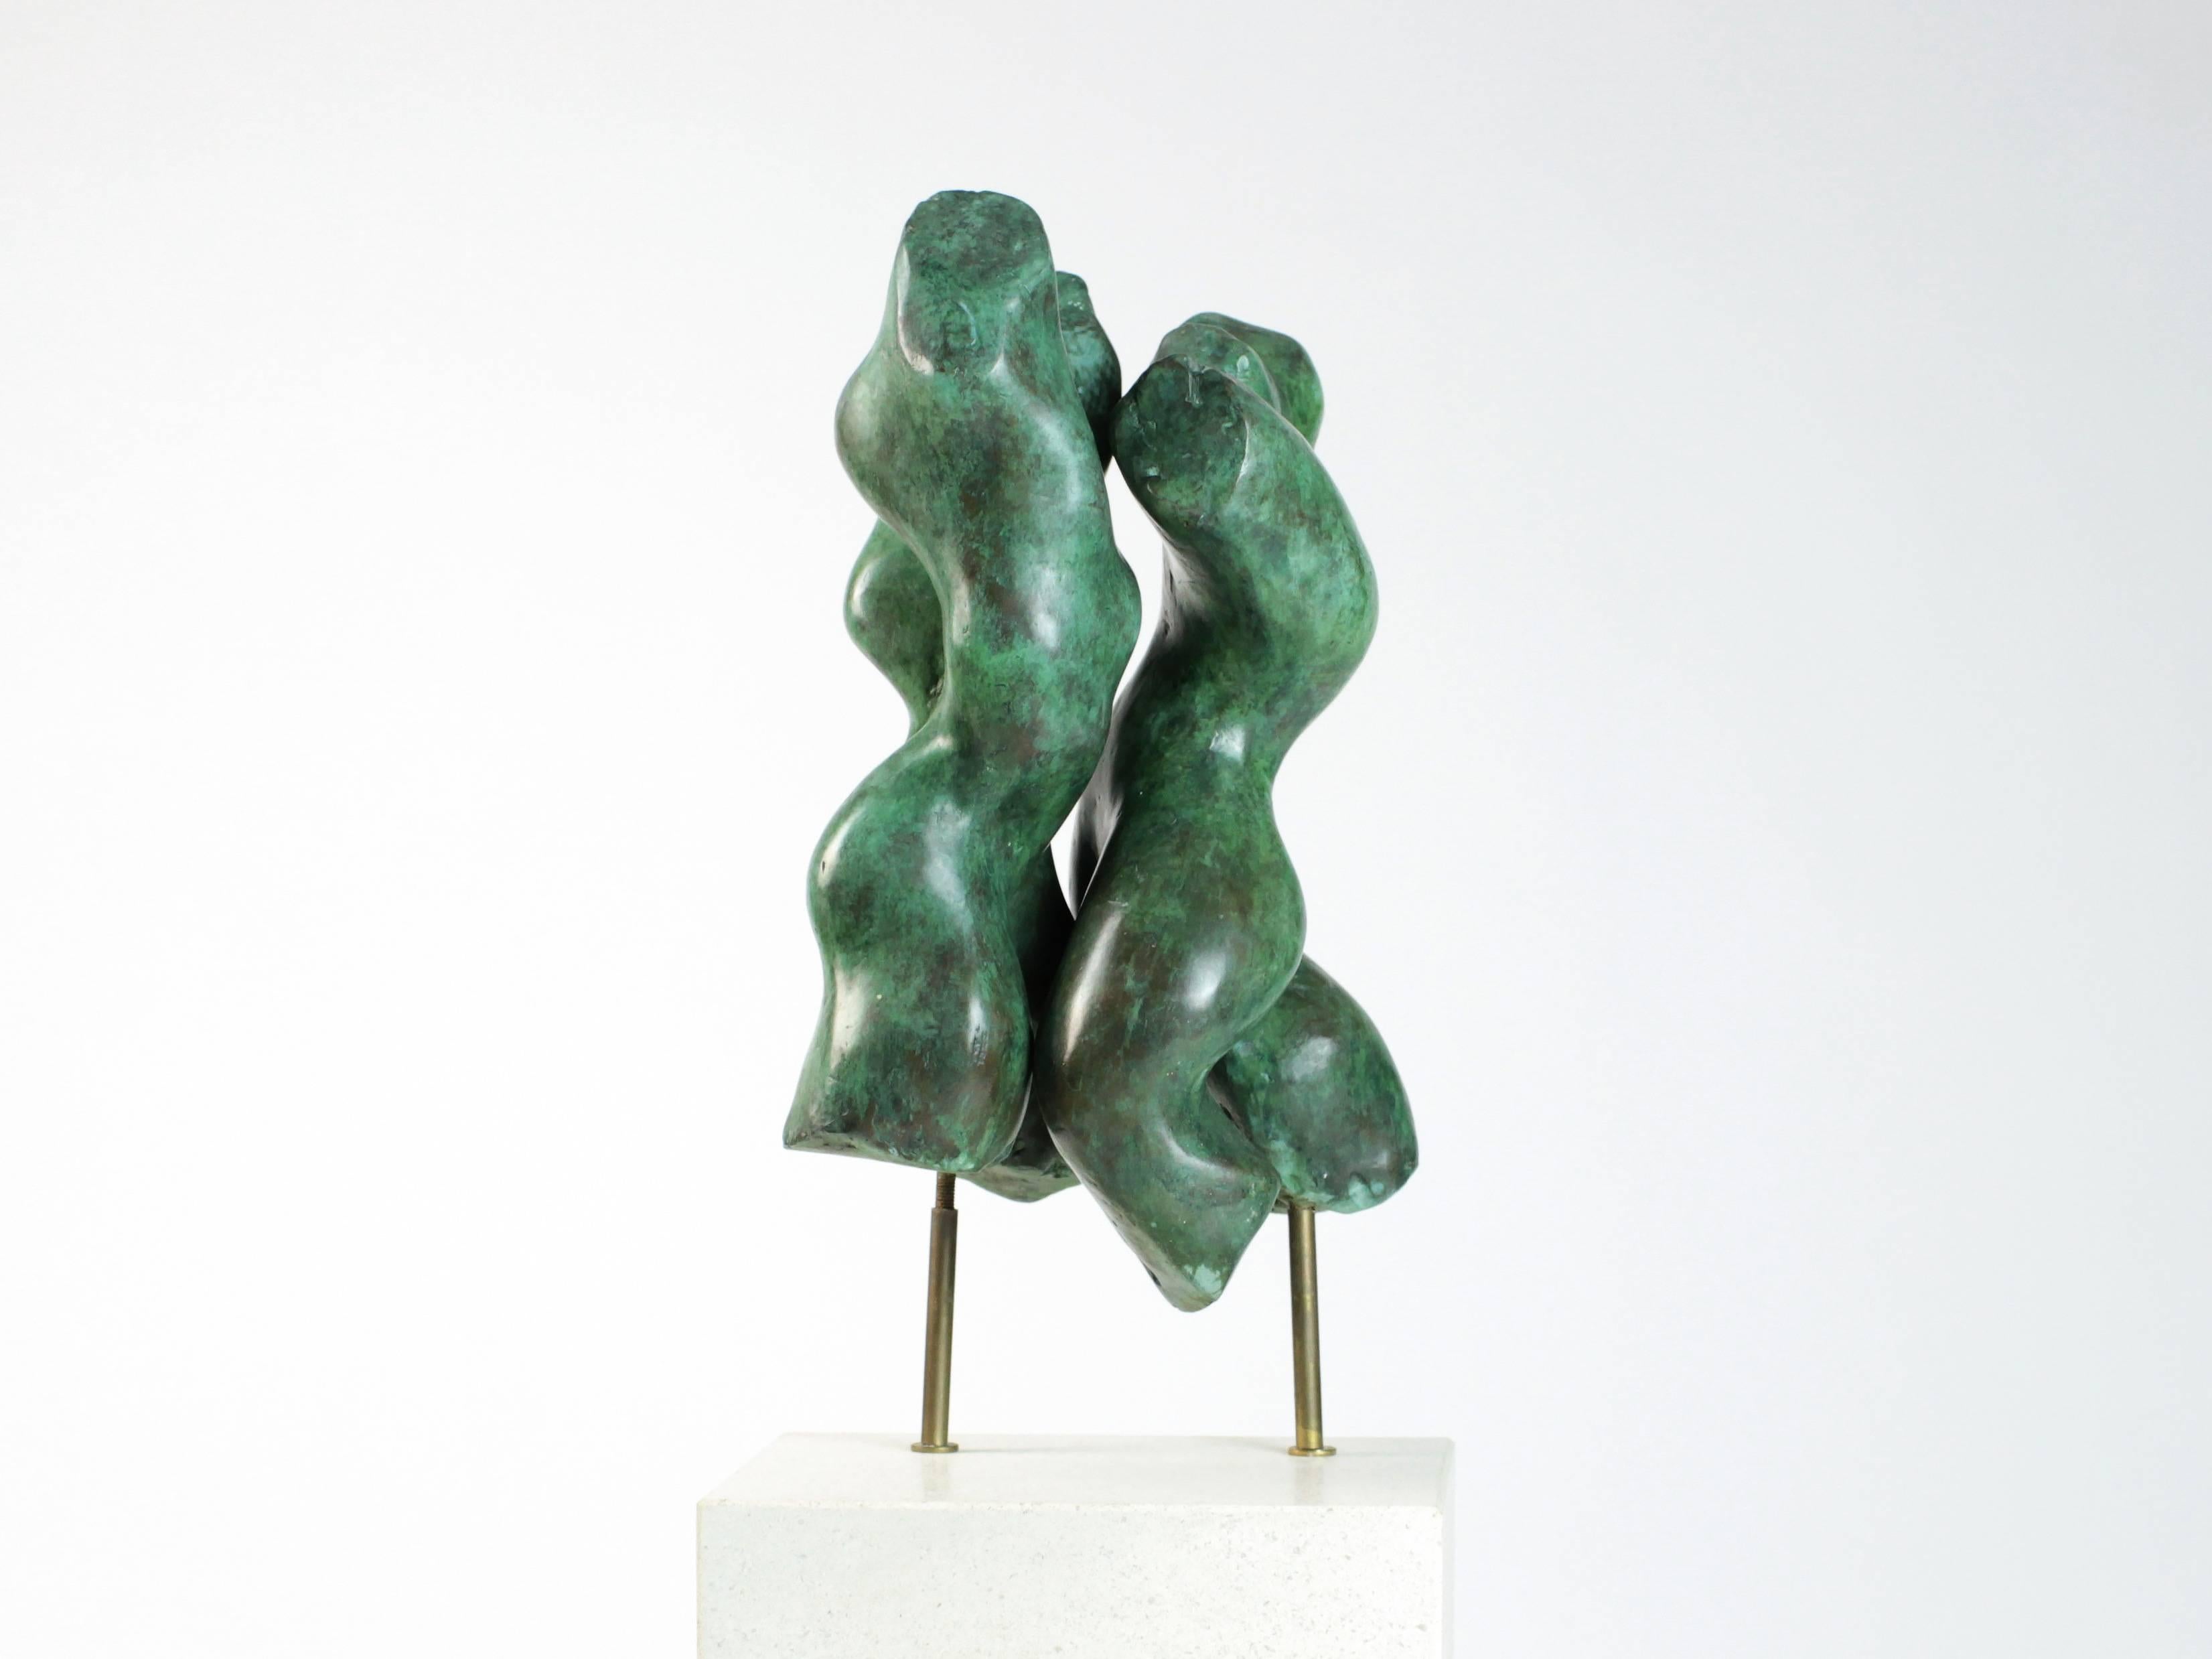 Tango is a bronze sculpture on a base by contemporary artist Yann Guillon. Dimensions are 26 x 19 x 17 cm (10.2 × 7.5 × 6.7 in), dimensions of the base are 14 x 22 x 14 cm (5.5 x 8.7 x 5.5 in). The total height of the sculpture and the base is 51 cm